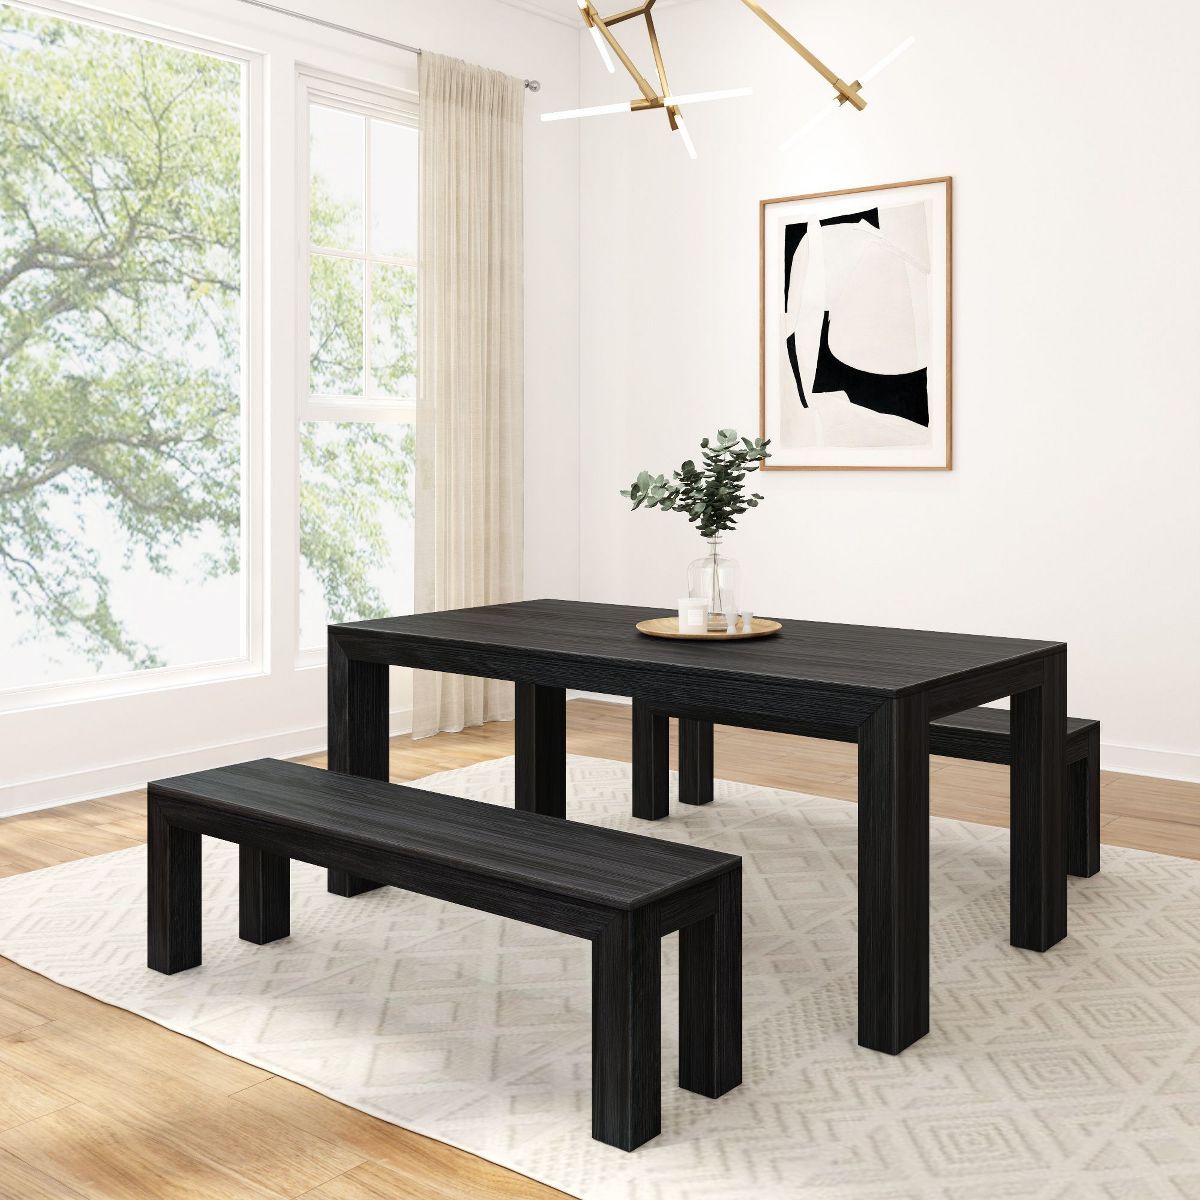 Plank+Beam Farmhouse Dining Table Set with 2 Benches, Table for Dining Room/Kitchen, Seats 6, 72 ... | Target